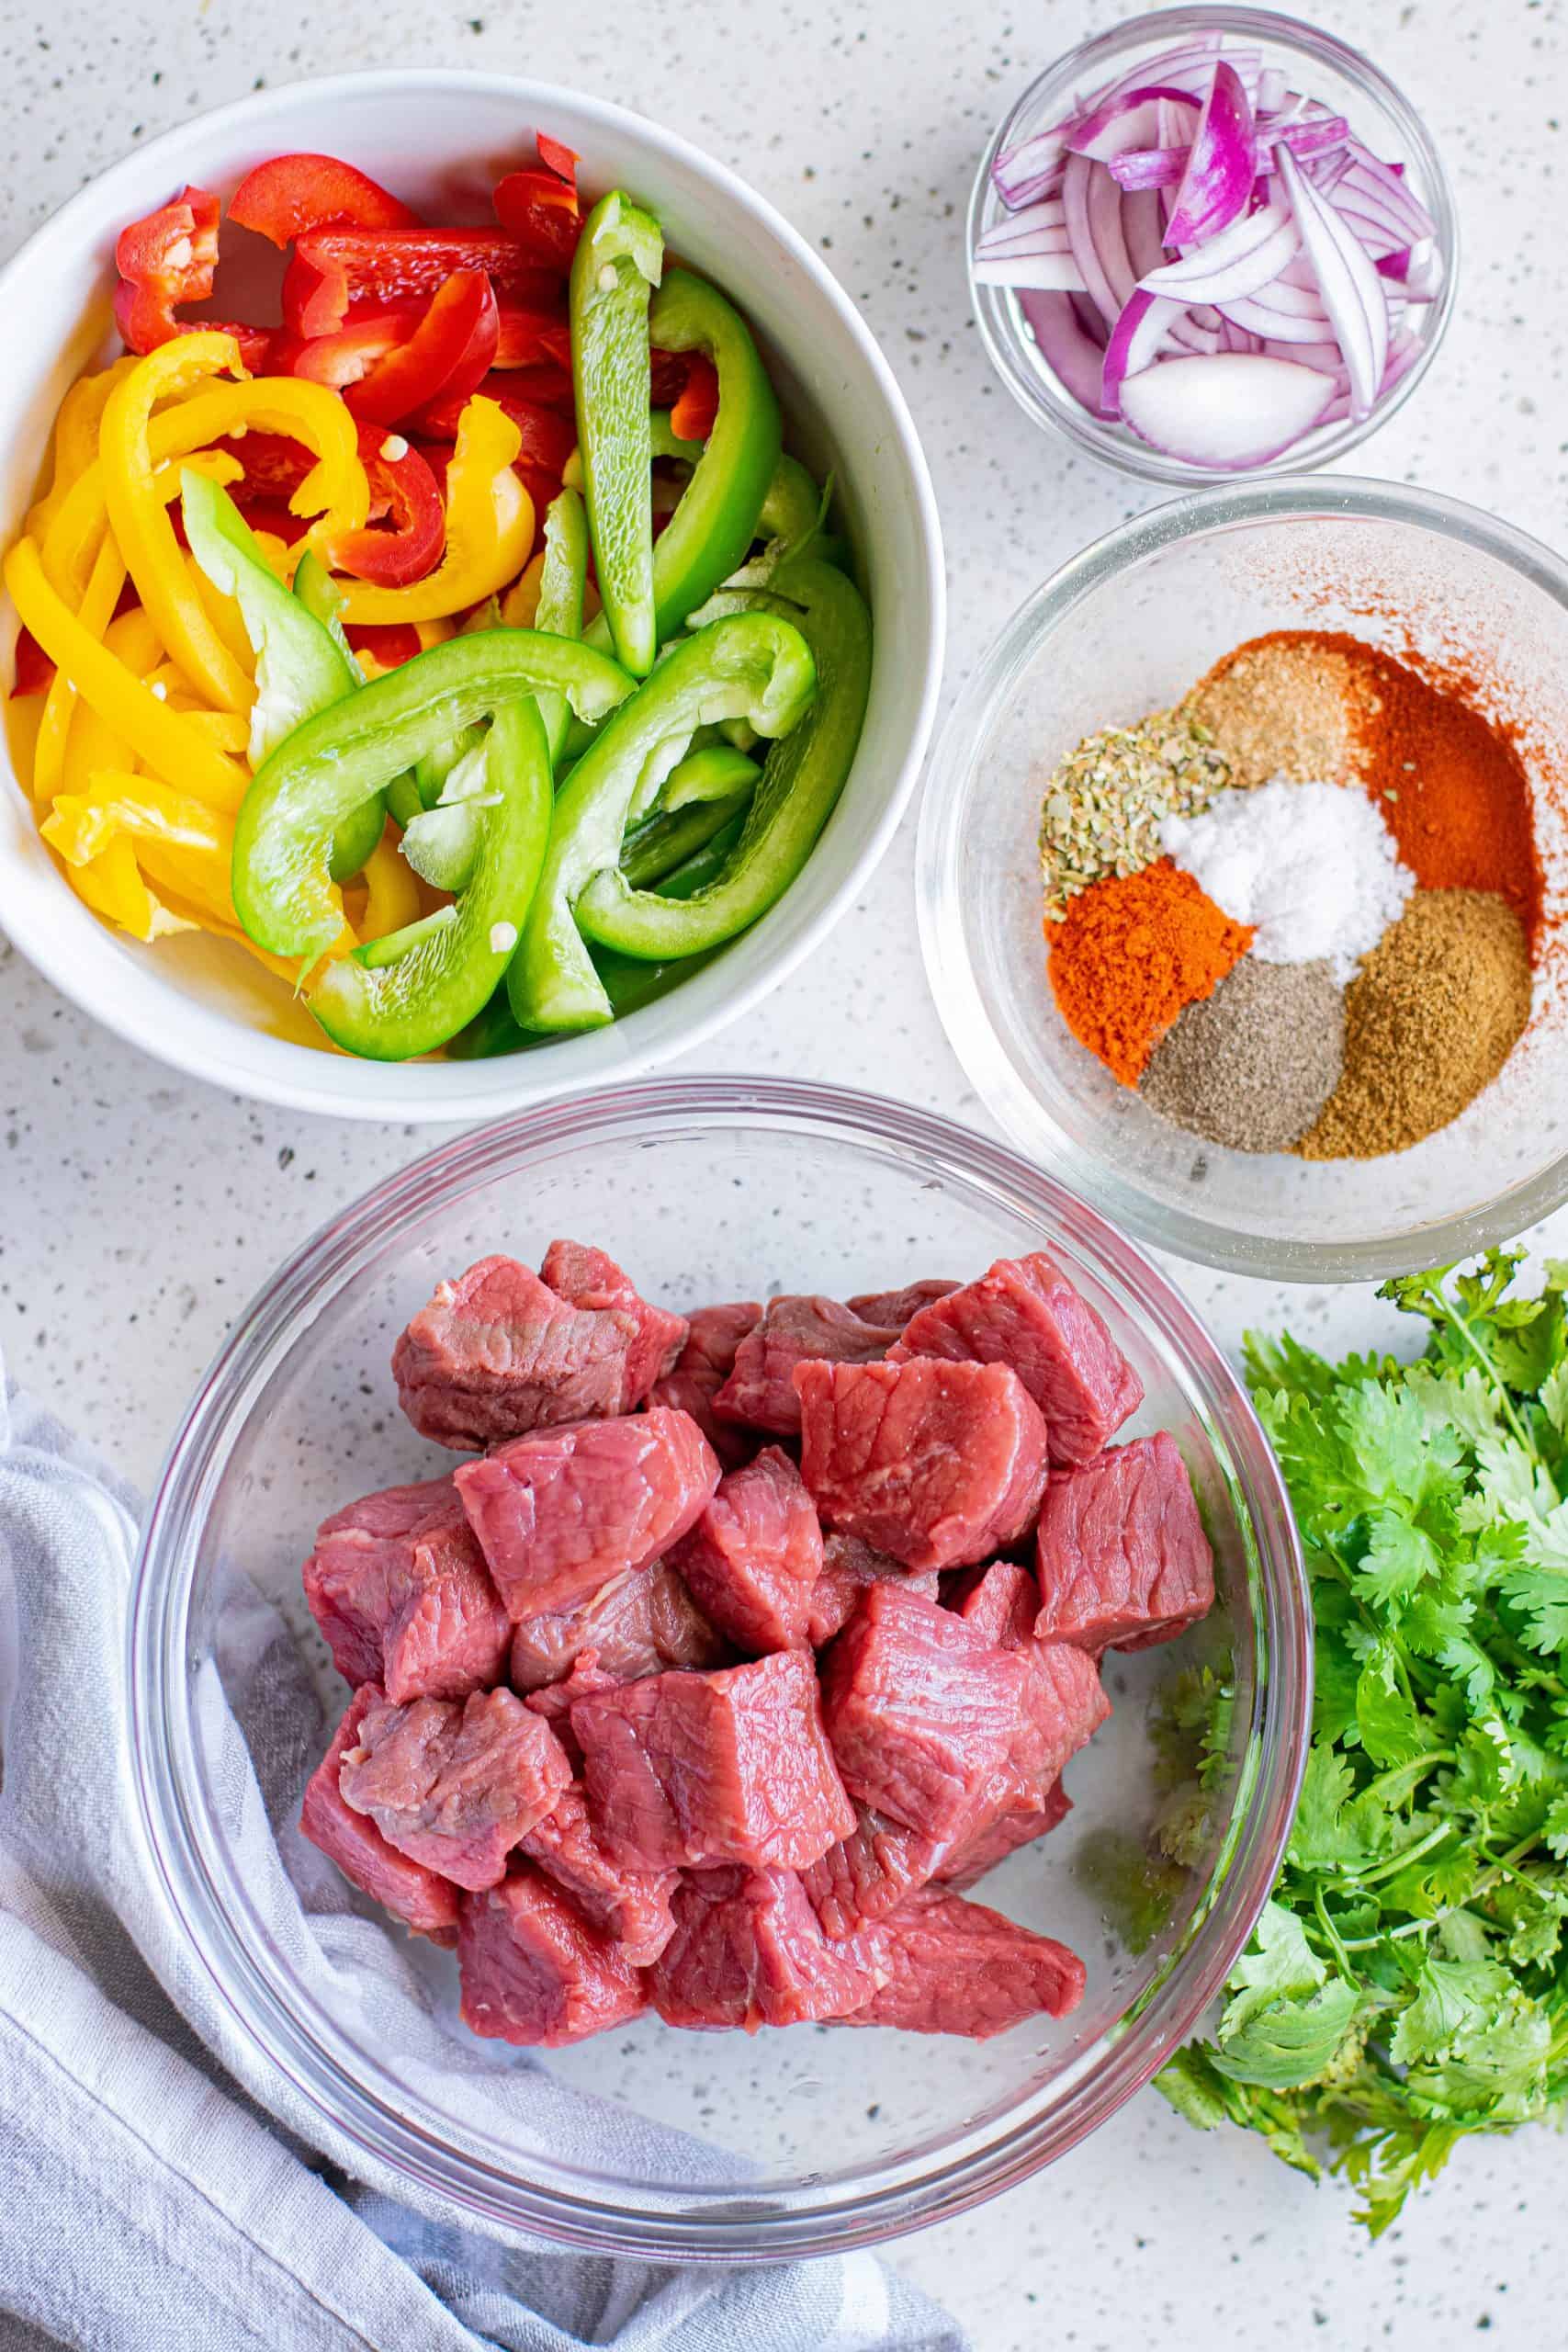 Ingredients needed steak, chili powder, garlic powder, smoked paprika, ground cumin, dried oregano, sea salt, black pepper, olive oil, red onion and bell peppers.